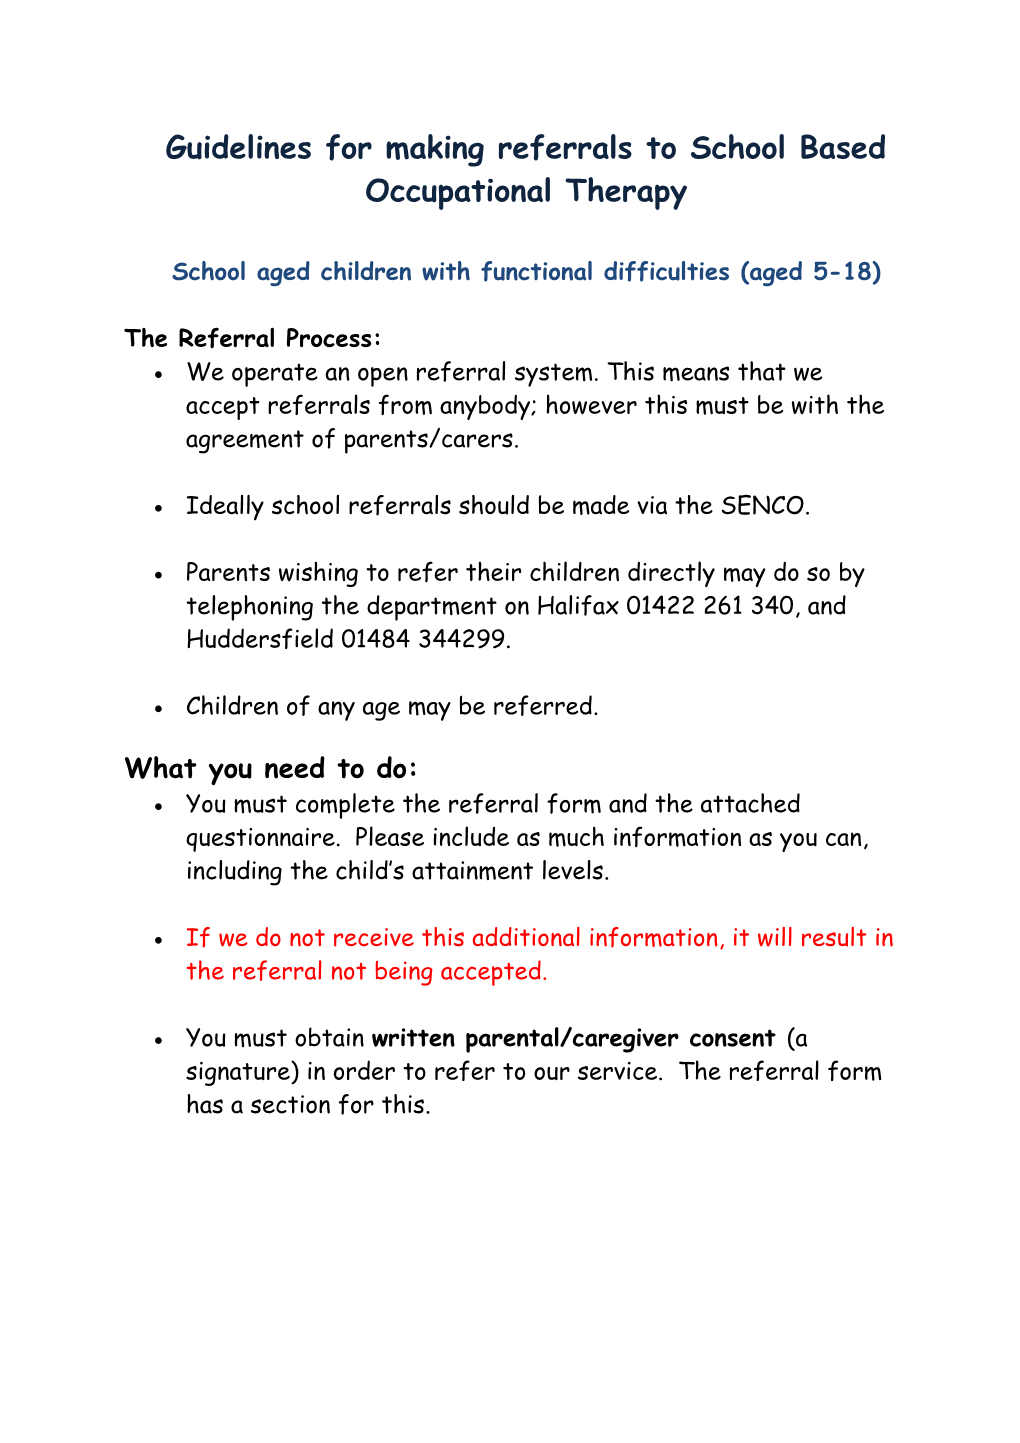 Guidelines for Making Referrals to School Based Occupational Therapy